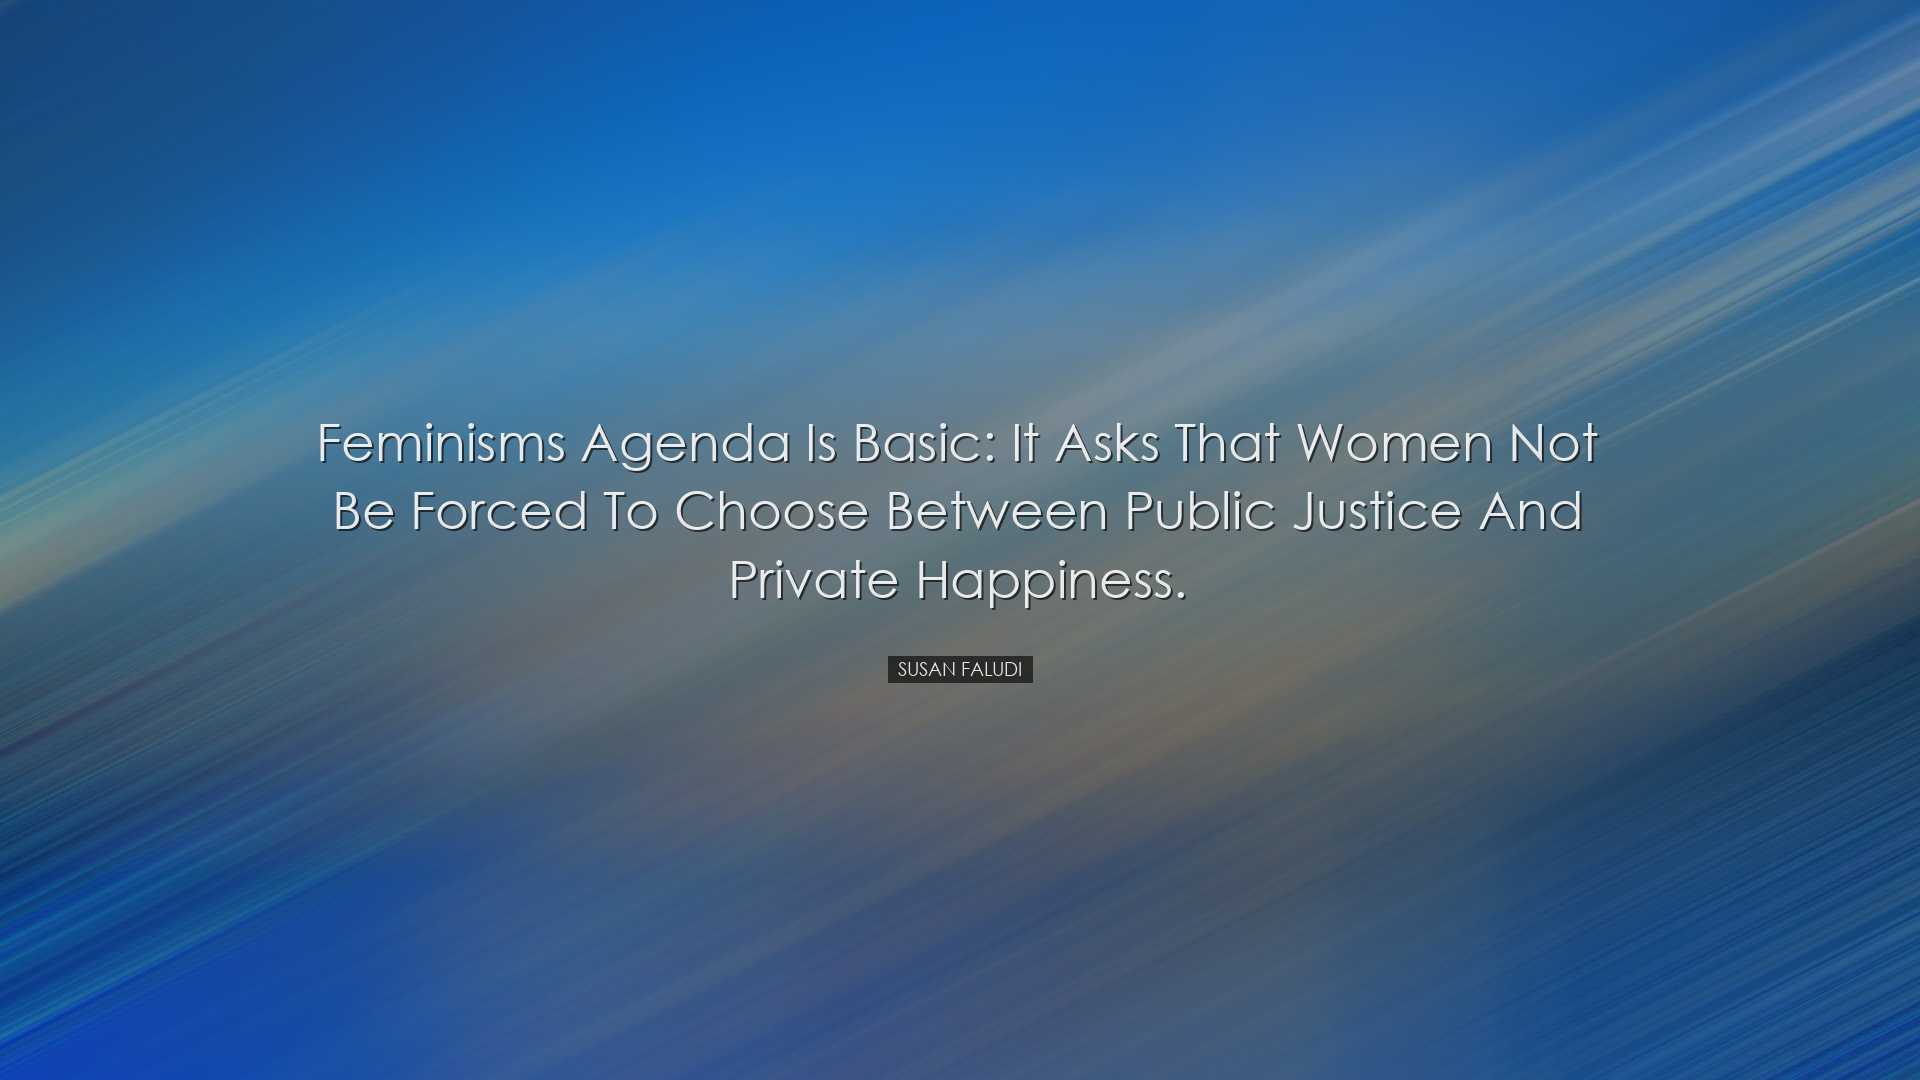 Feminisms agenda is basic: It asks that women not be forced to cho